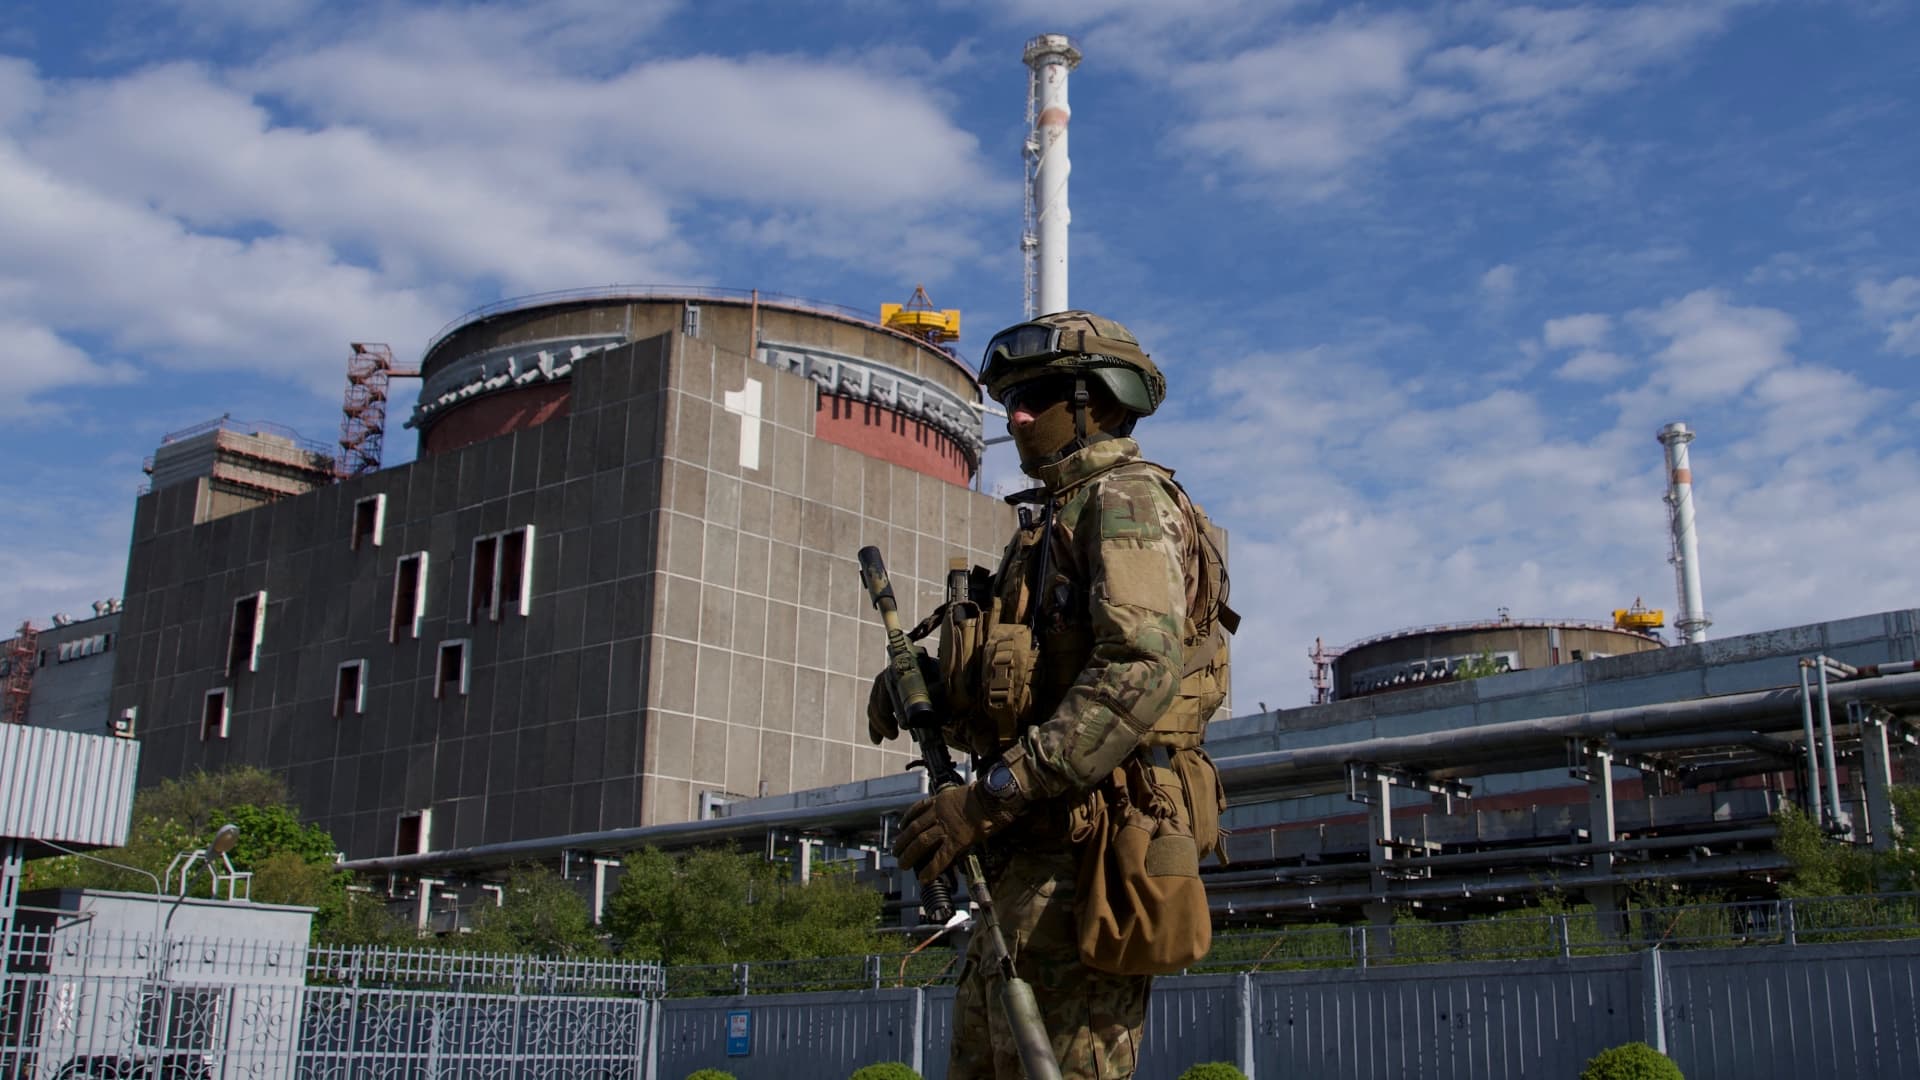 A Russian serviceman patrols the territory of the Zaporizhzhia Nuclear Power Station in Energodar on May 1, 2022. The Zaporizhzhia Nuclear Power Station, seized by Russian forces in March, is in southeastern Ukraine and is the largest nuclear power plant in Europe and among the 10 largest in the world.